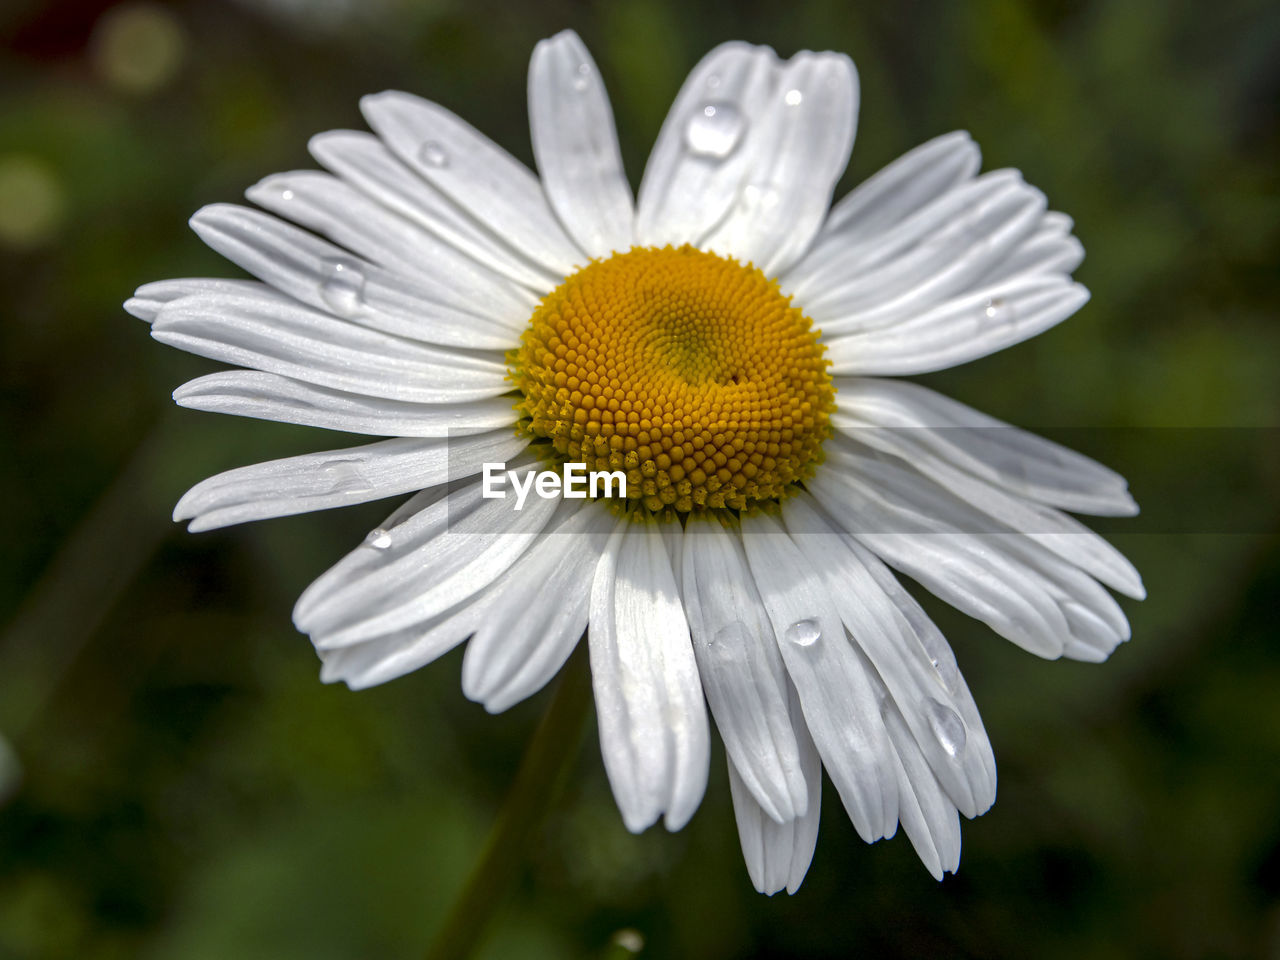 White chamomile with raindrops on its petals on a blurred natural background